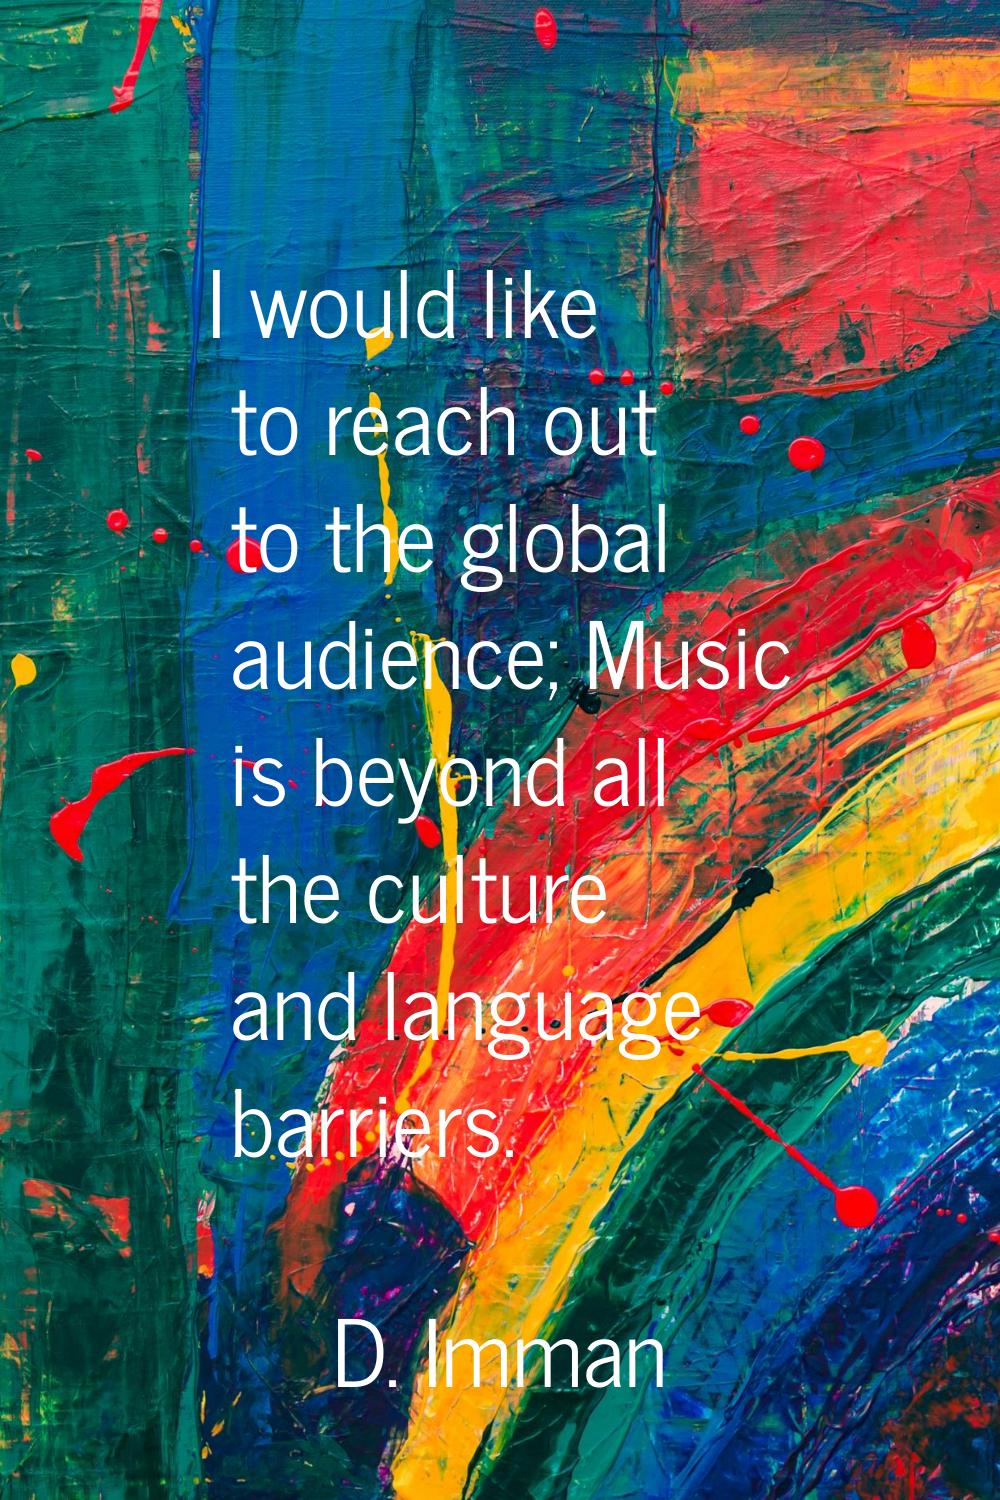 I would like to reach out to the global audience; Music is beyond all the culture and language barr